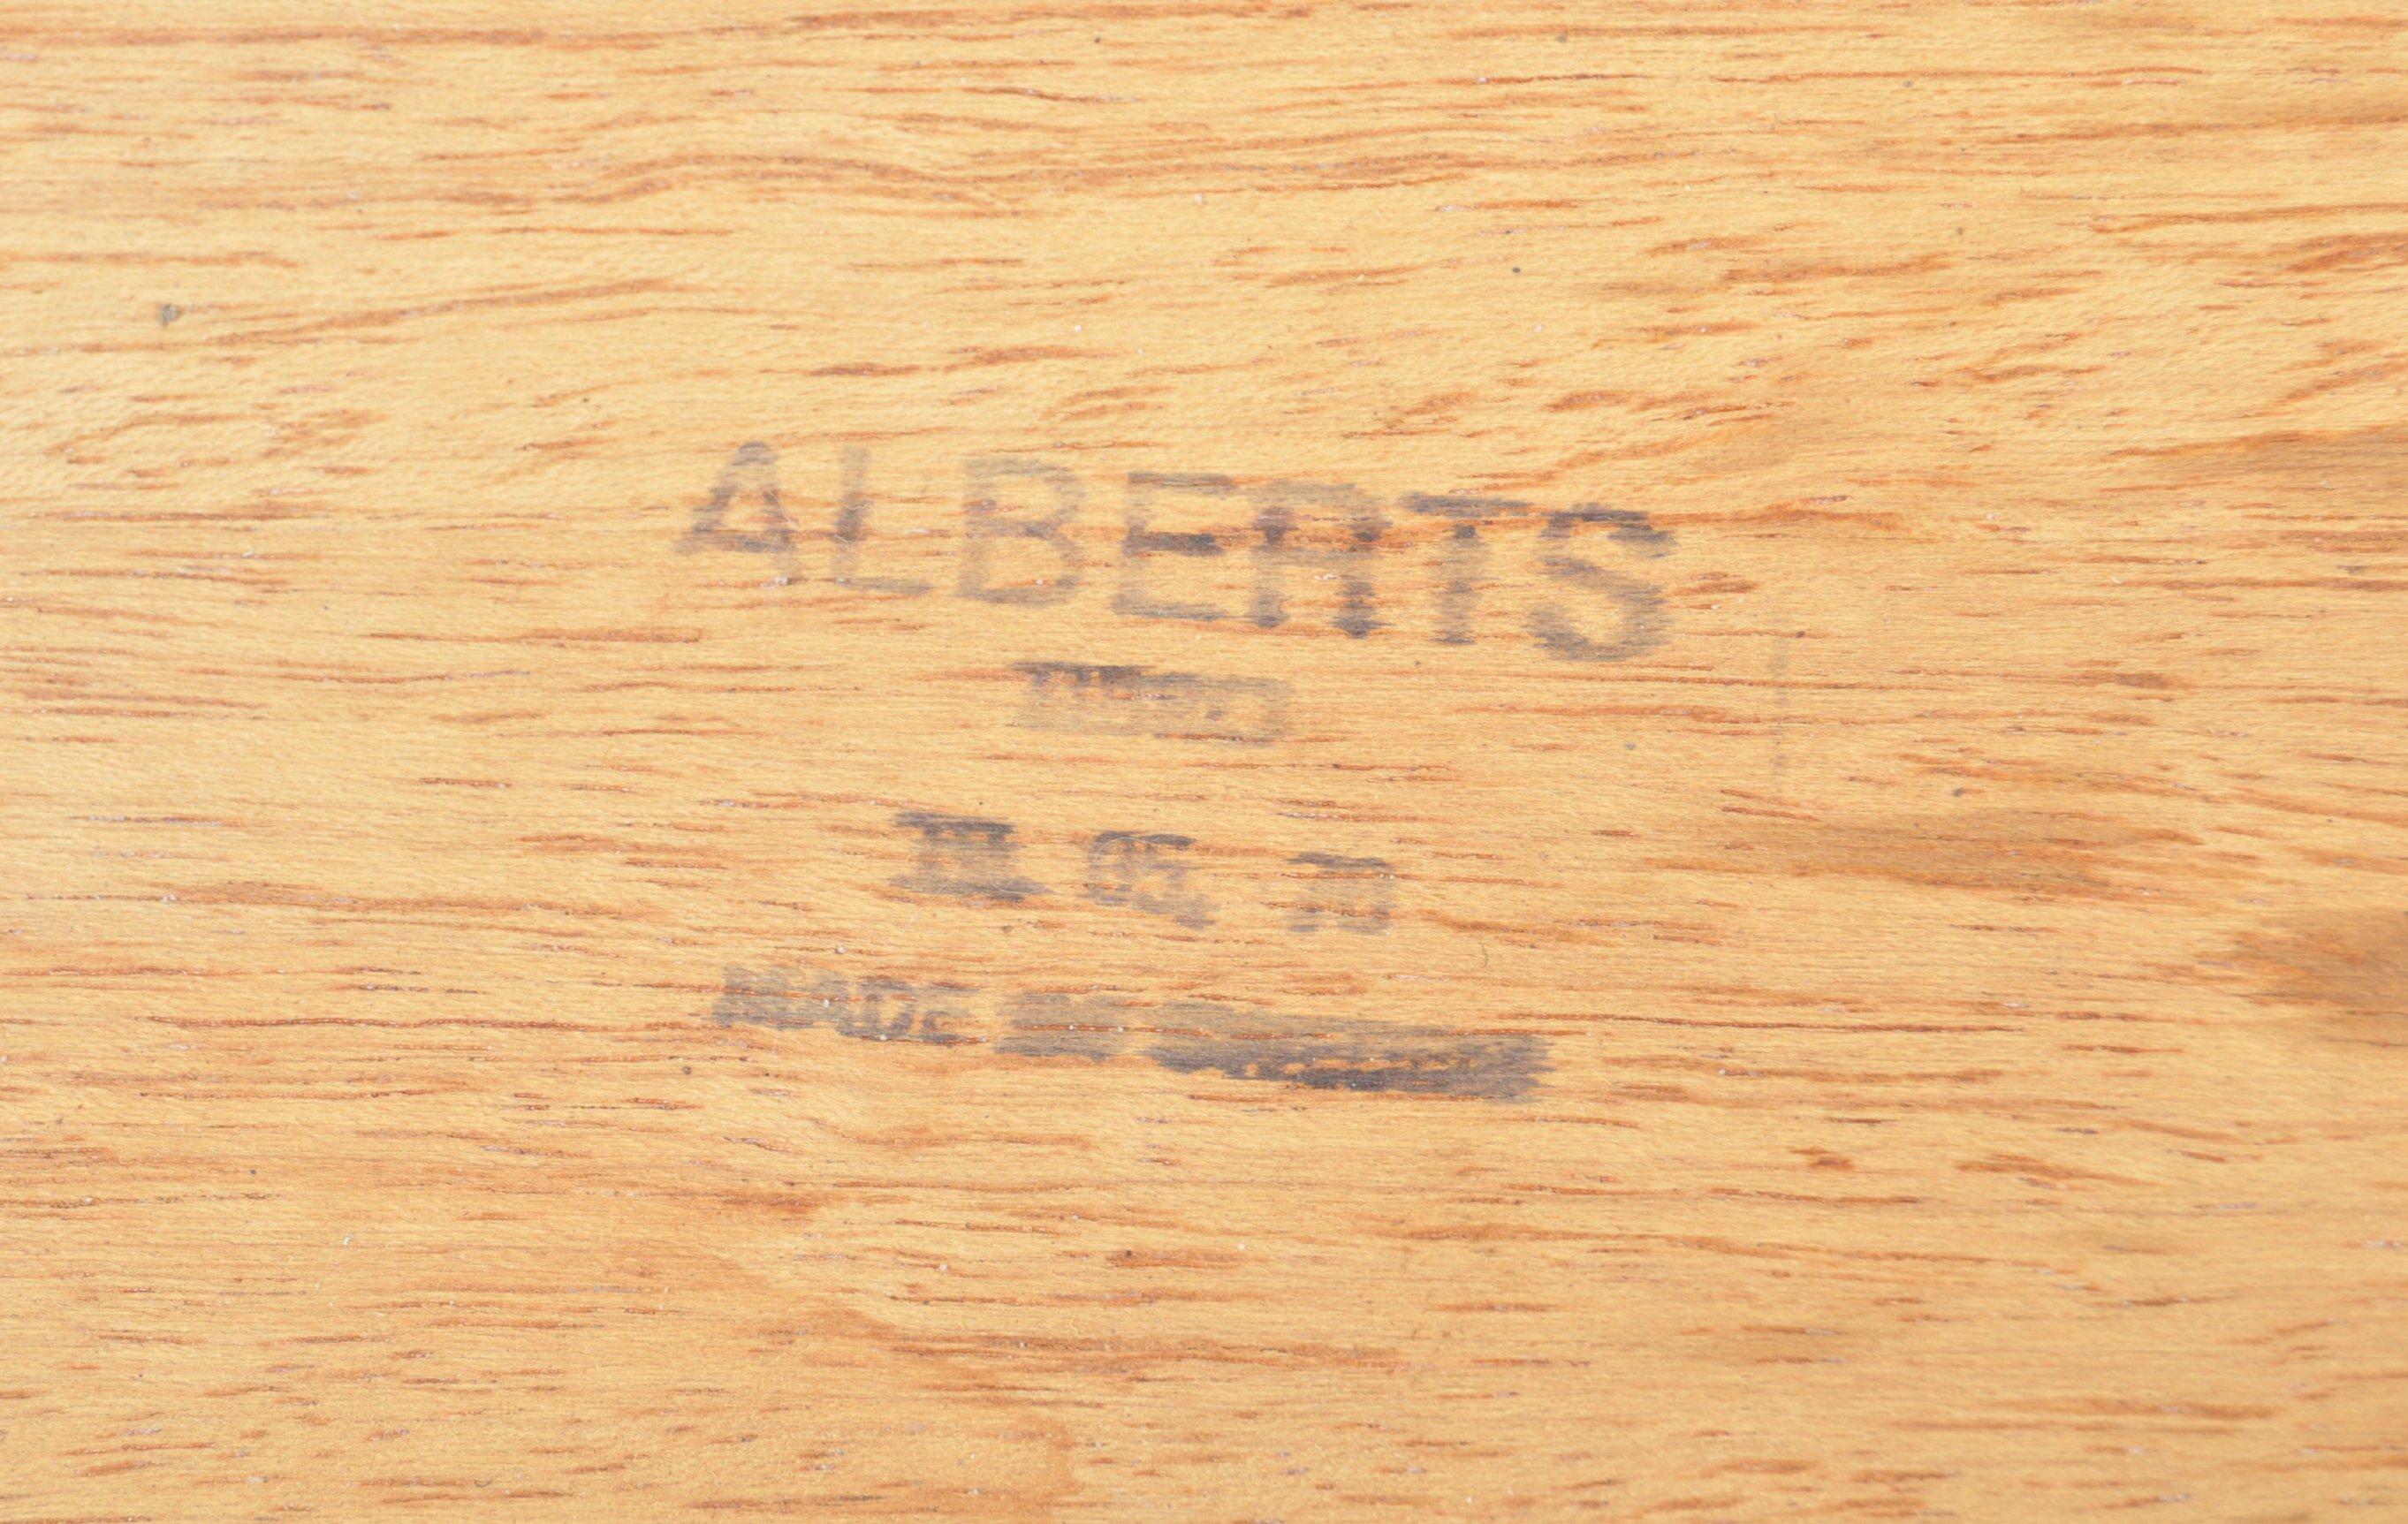 ALBERT LARSSON FOR ALBERTS TIBRO - PAIR OF MID CENTURY TABLES - Image 7 of 7